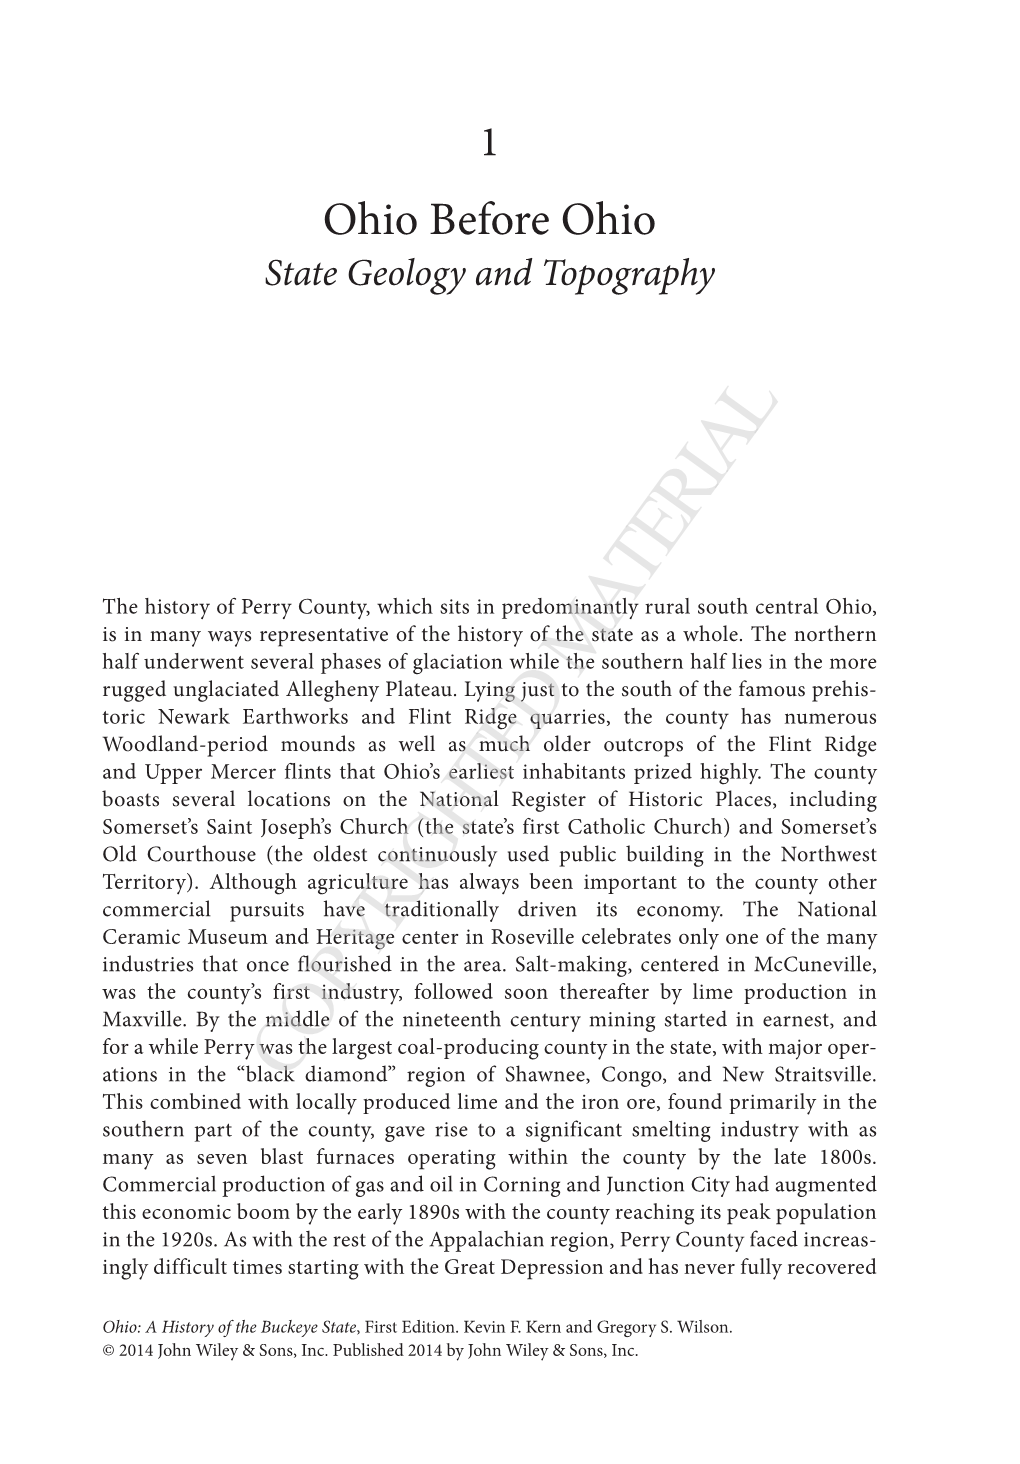 State Geology and Topography